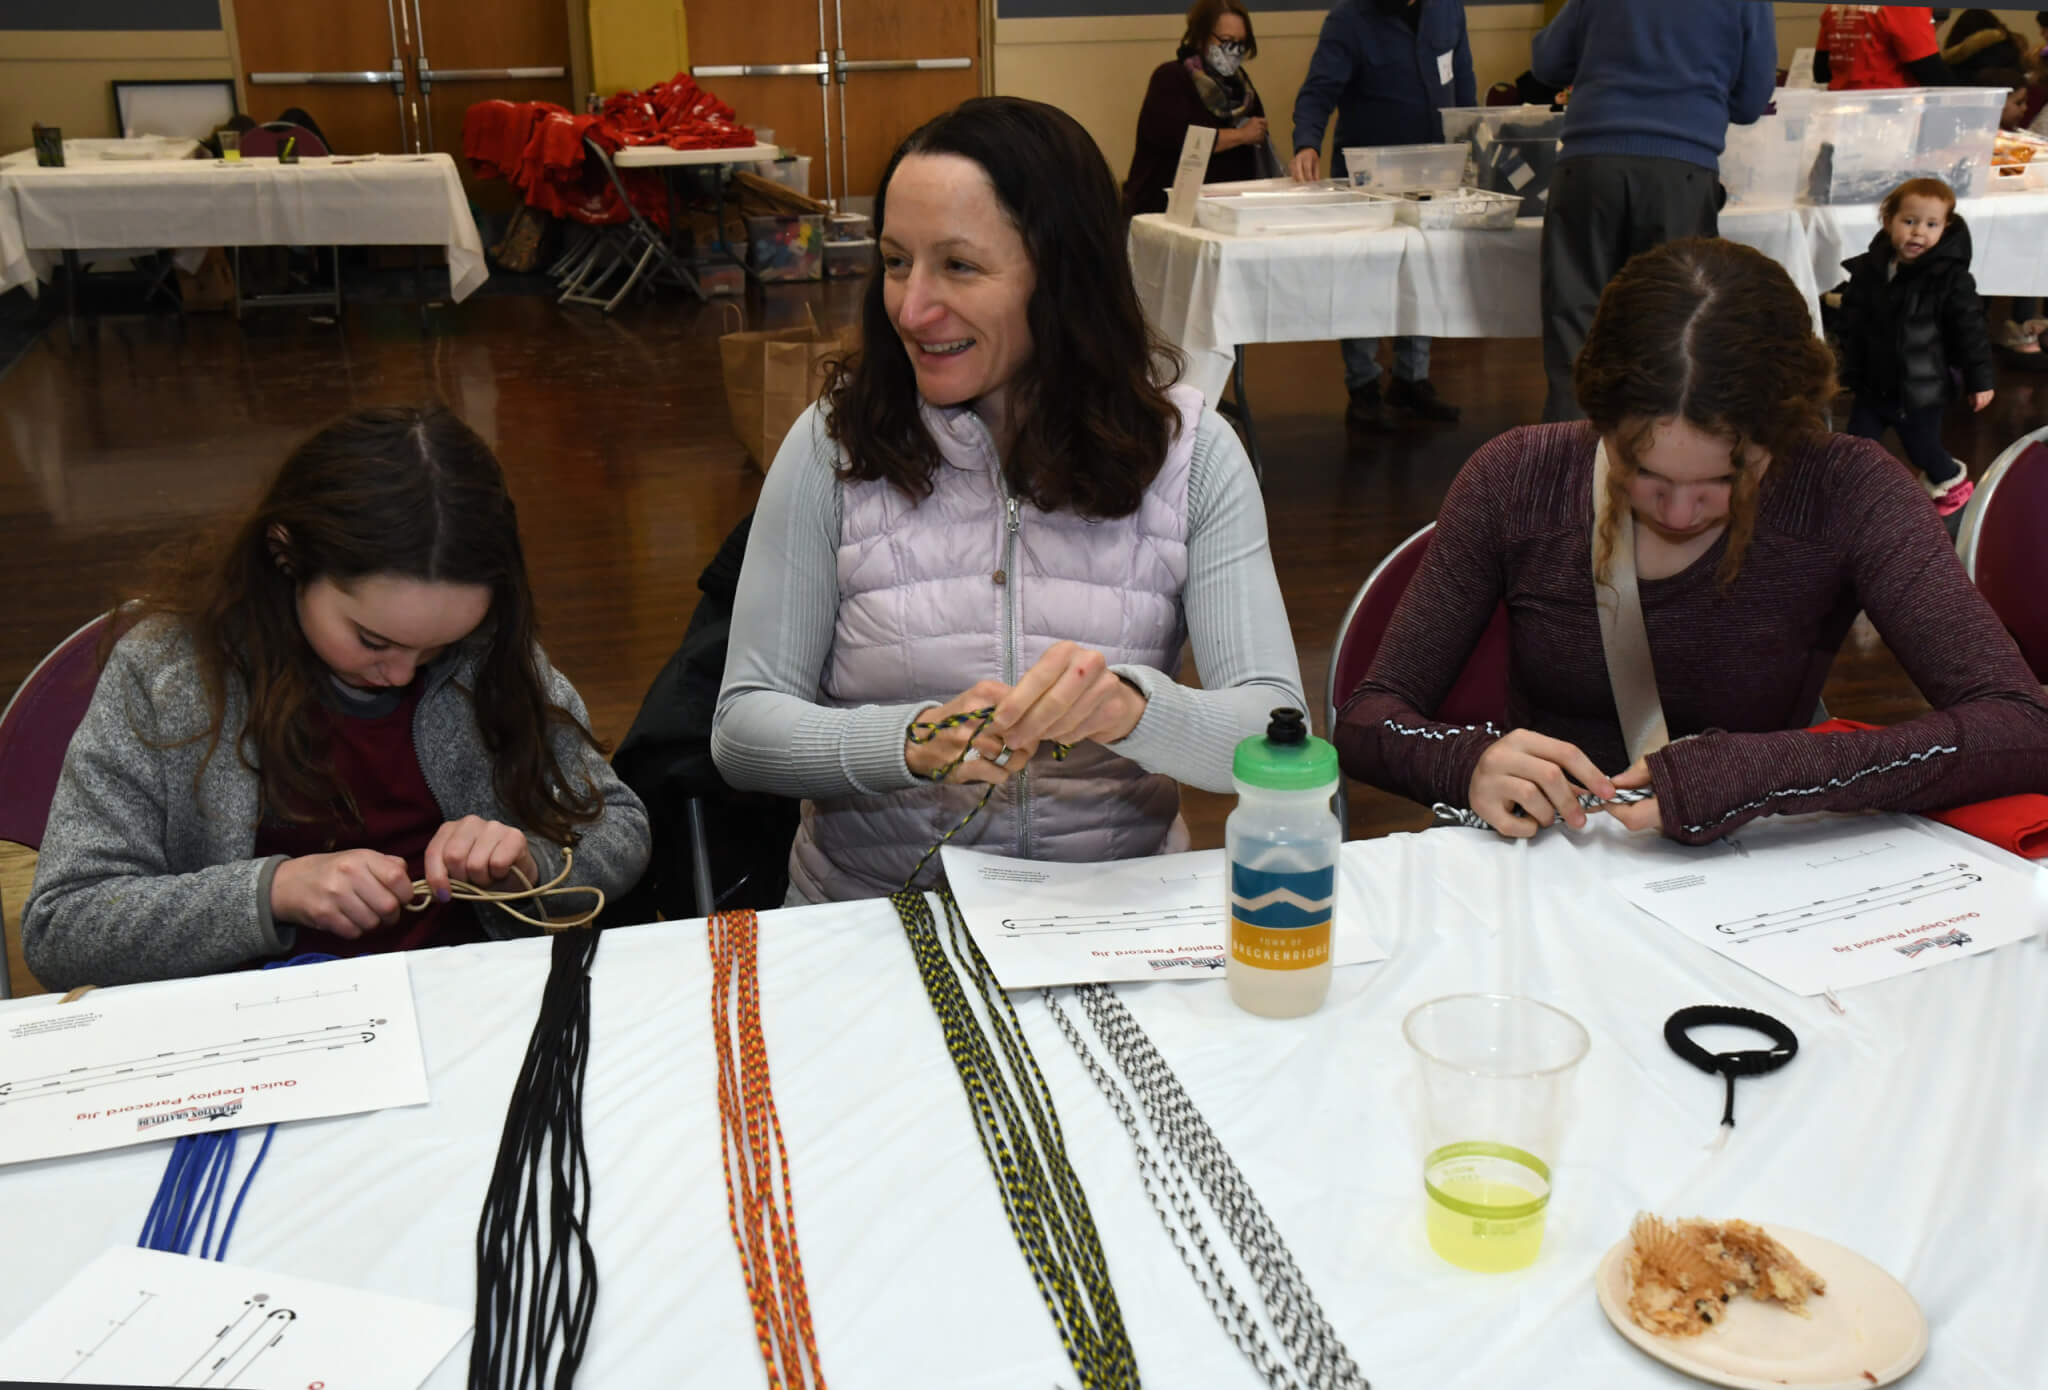 Crafting at Christmas Mitzvah family site